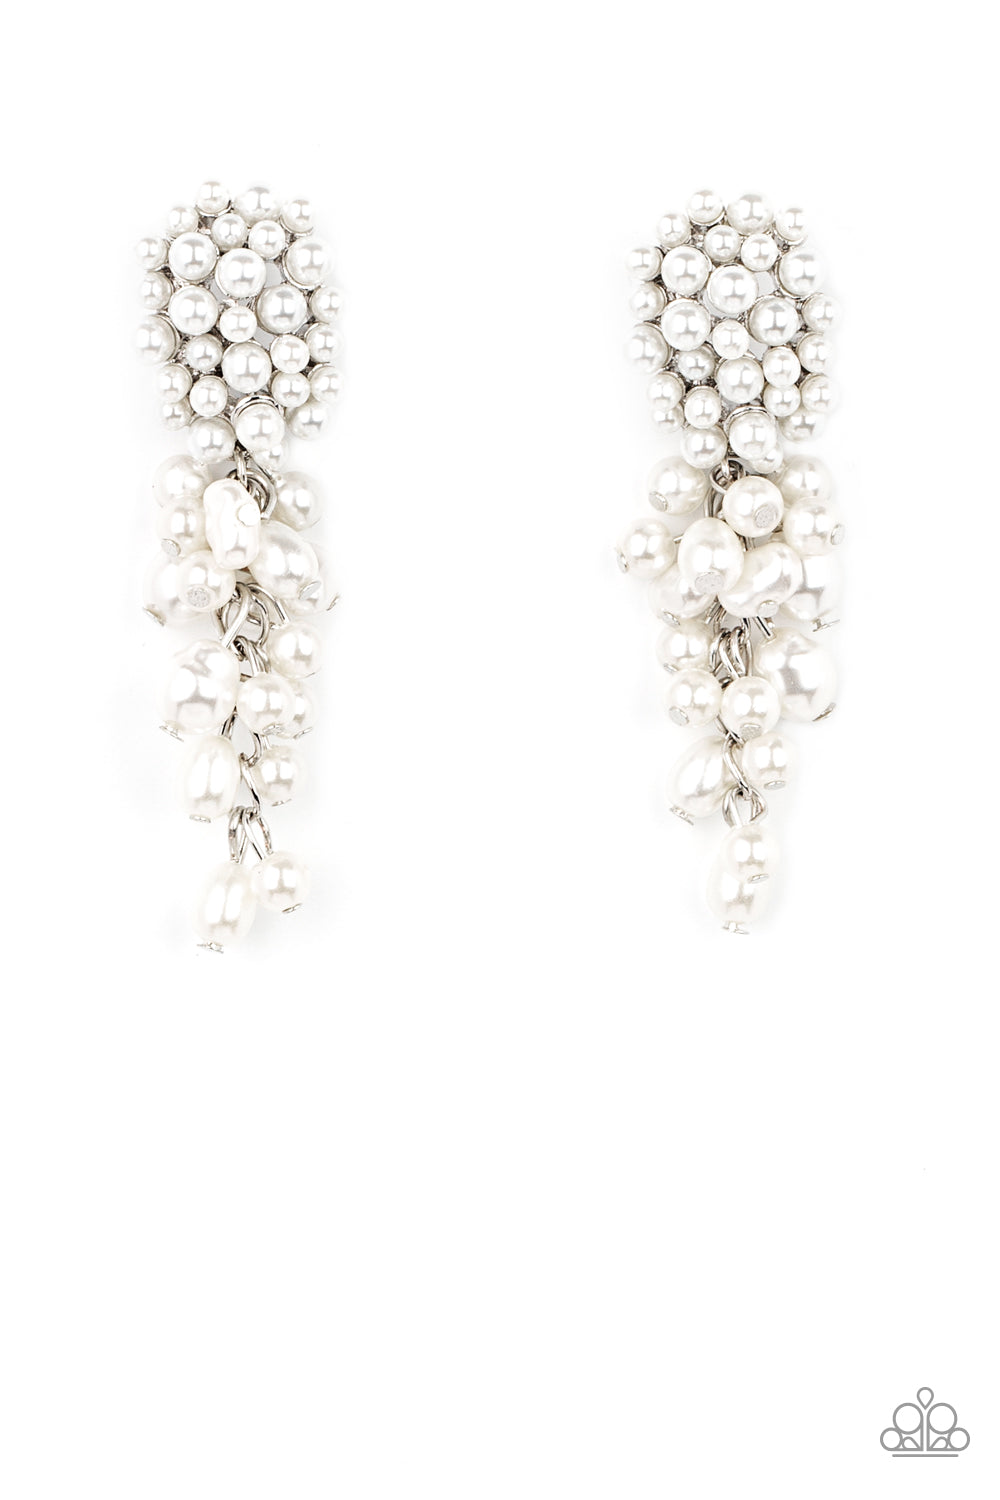 Fabulously Flattering - White Earrings featuring imperfect finishes, a bubbly tassel of white pearls trickles from the bottom of a pearl encrusted silver fitting for a timeless look. Earring attaches to a standard post fitting.  Sold as one pair of post earrings.  Paparazzi Jewelry is lead and nickel free so it's perfect for sensitive skin too!